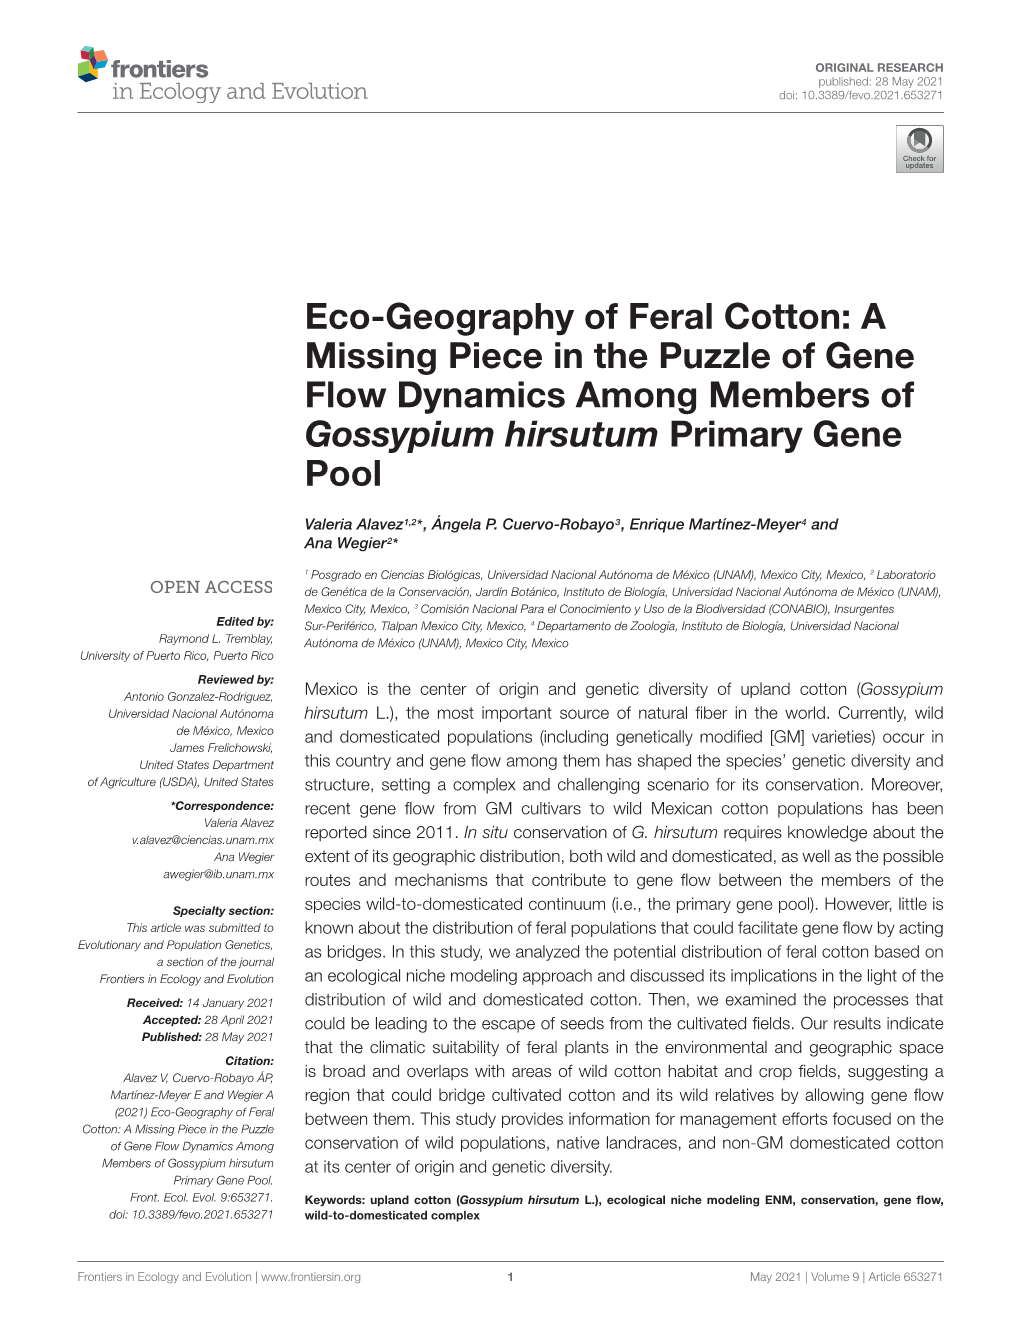 Eco-Geography of Feral Cotton: a Missing Piece in the Puzzle of Gene Flow Dynamics Among Members of Gossypium Hirsutum Primary Gene Pool